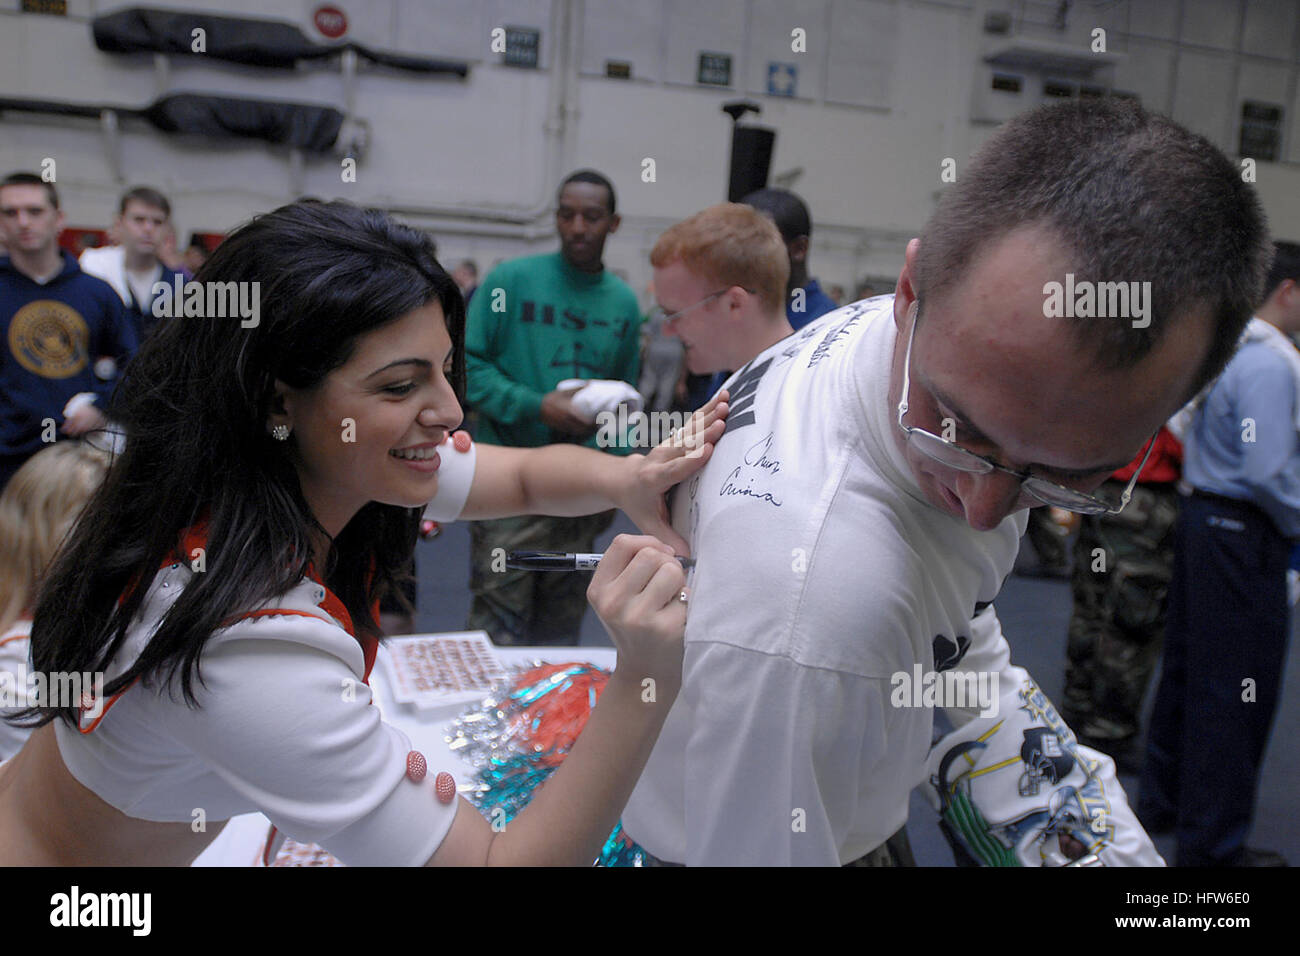 080203-N-5248R-007 ATLANTIC OCEAN (Feb. 3, 2008) Aviation Boatswain's Mate (Handling) 3rd Class Keith Gutkowski, from Keene, N.H., gets his shirt signed by Miami Dolphins cheerleader Ireivy in the hangar bay of the Nimitz-class aircraft carrier USS Theodore Roosevelt (CVN 71). The Roosevelt is conducting carrier qualifications off the Virginia coast. U.S. Navy photo by Mass Communication Specialist 3rd Class Sheldon Rowley (Released) US Navy 080203-N-5248R-007 Aviation Boatswain's Mate (Handling) 3rd Class Keith Gutkowski, from Keene, N.H., gets his shirt signed by Miami Dolphins cheerleader I Stock Photo